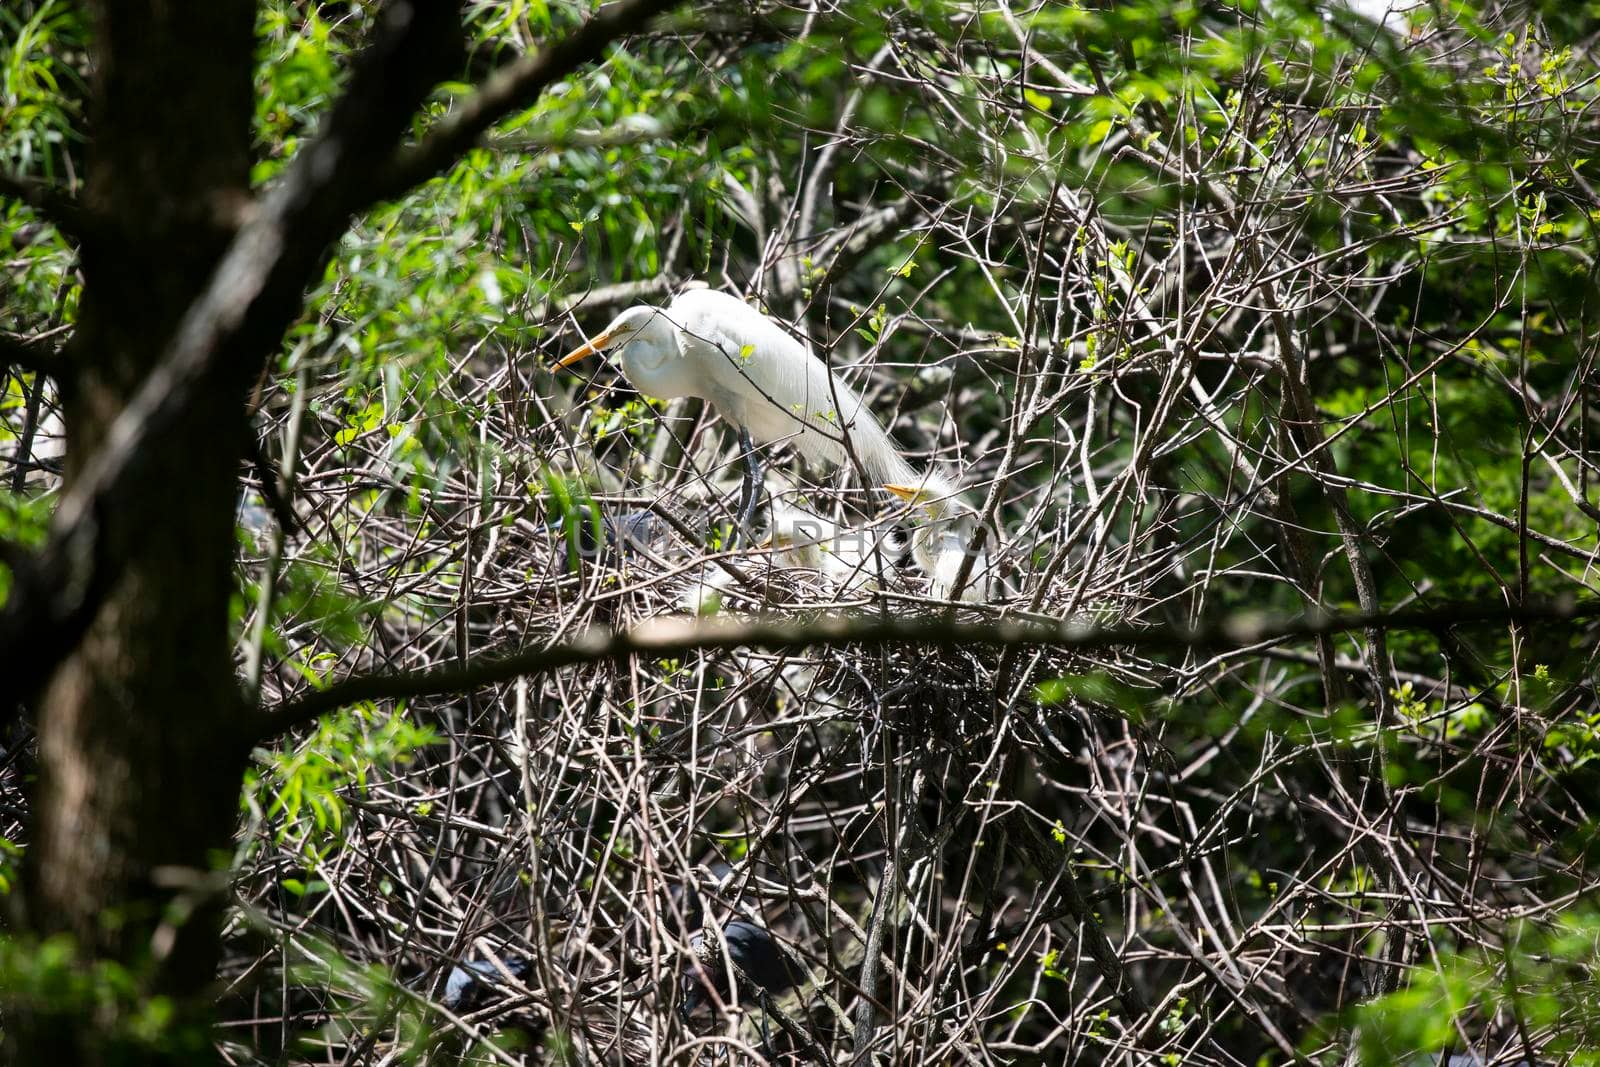 Great Egret Watching over Its Chicks by tornado98